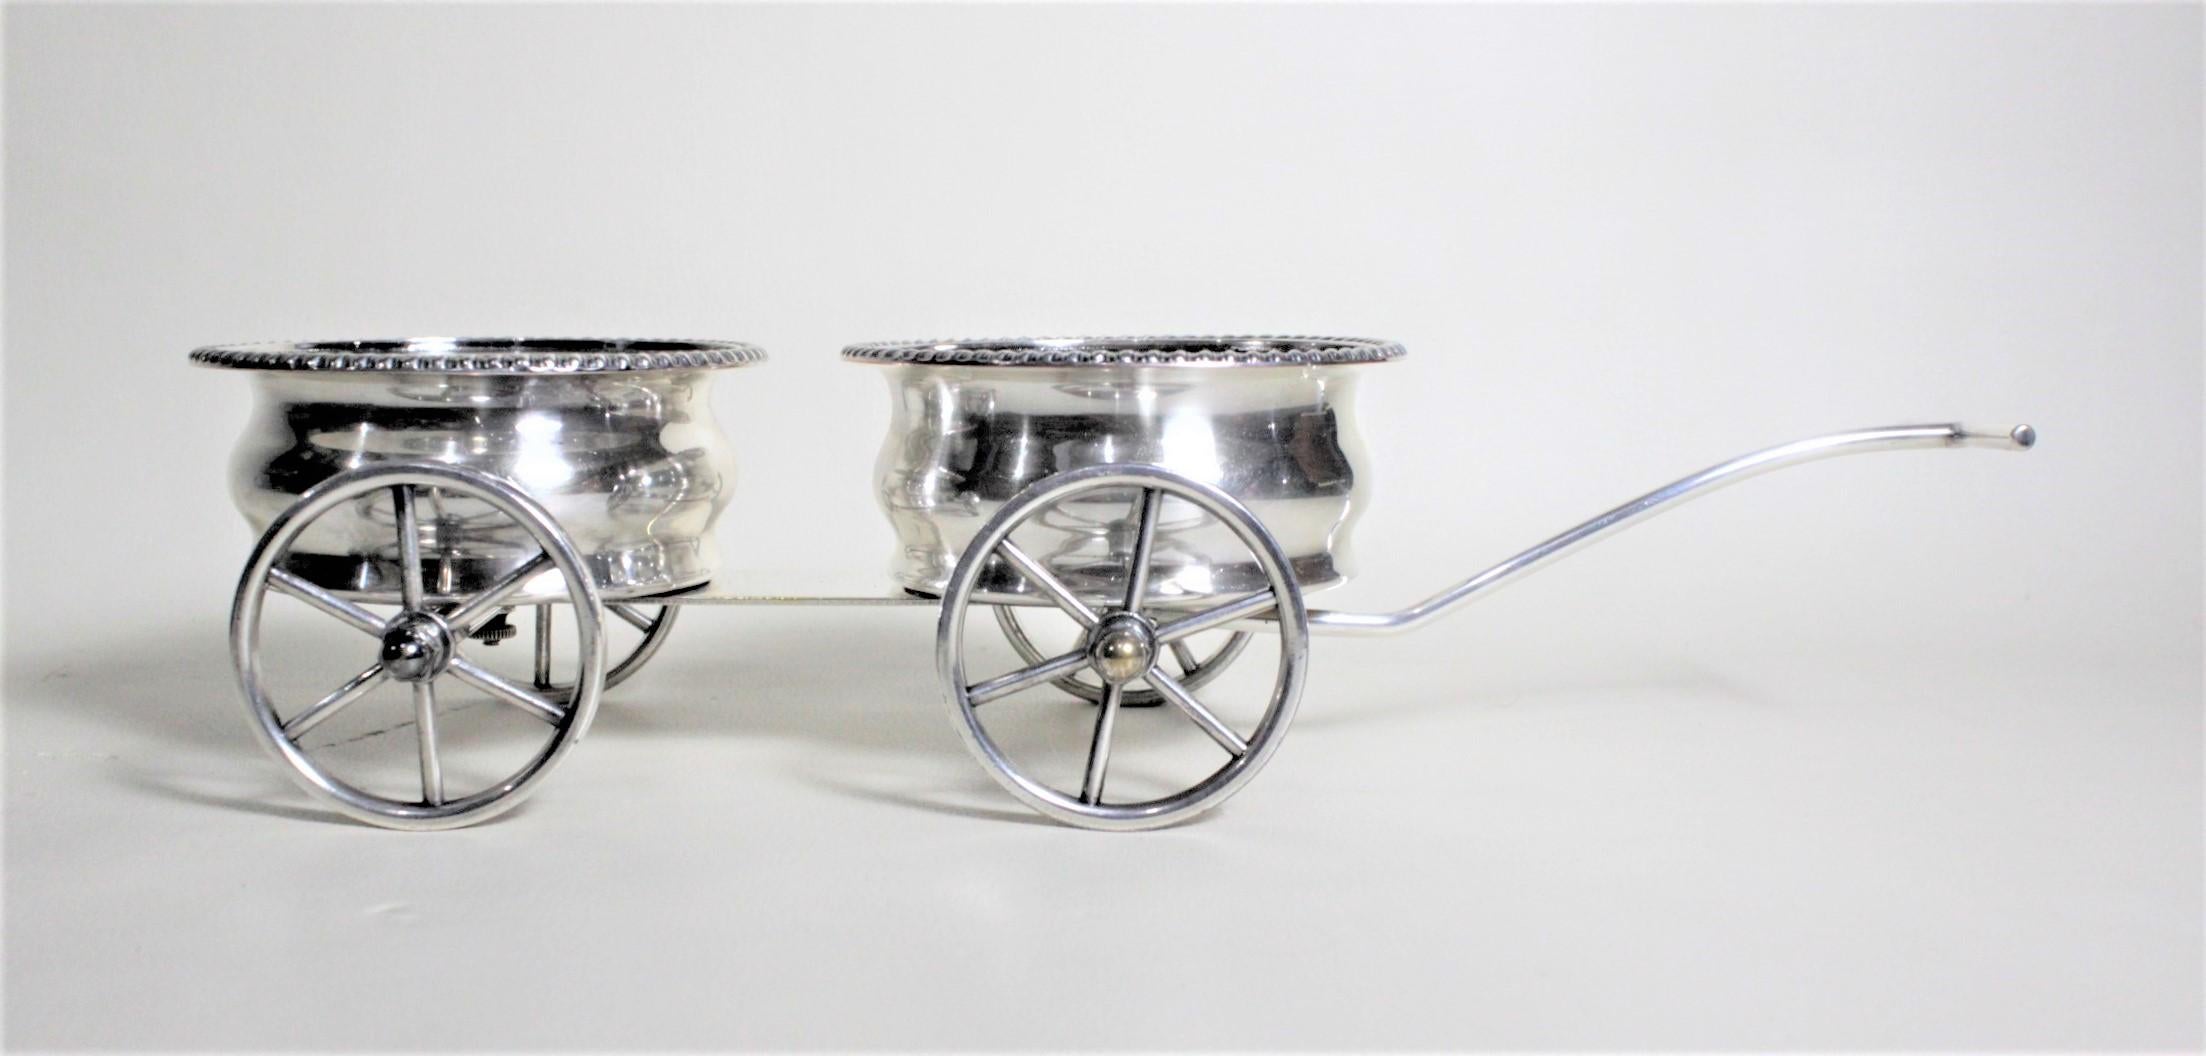 This silver plated figural wagon was made in England in circa 1965 in the style of a much earlier Victorian period. The wagon is solid cast brass and considerably sturdy and has freely turning spoked wheels and the front two pivot from side to side